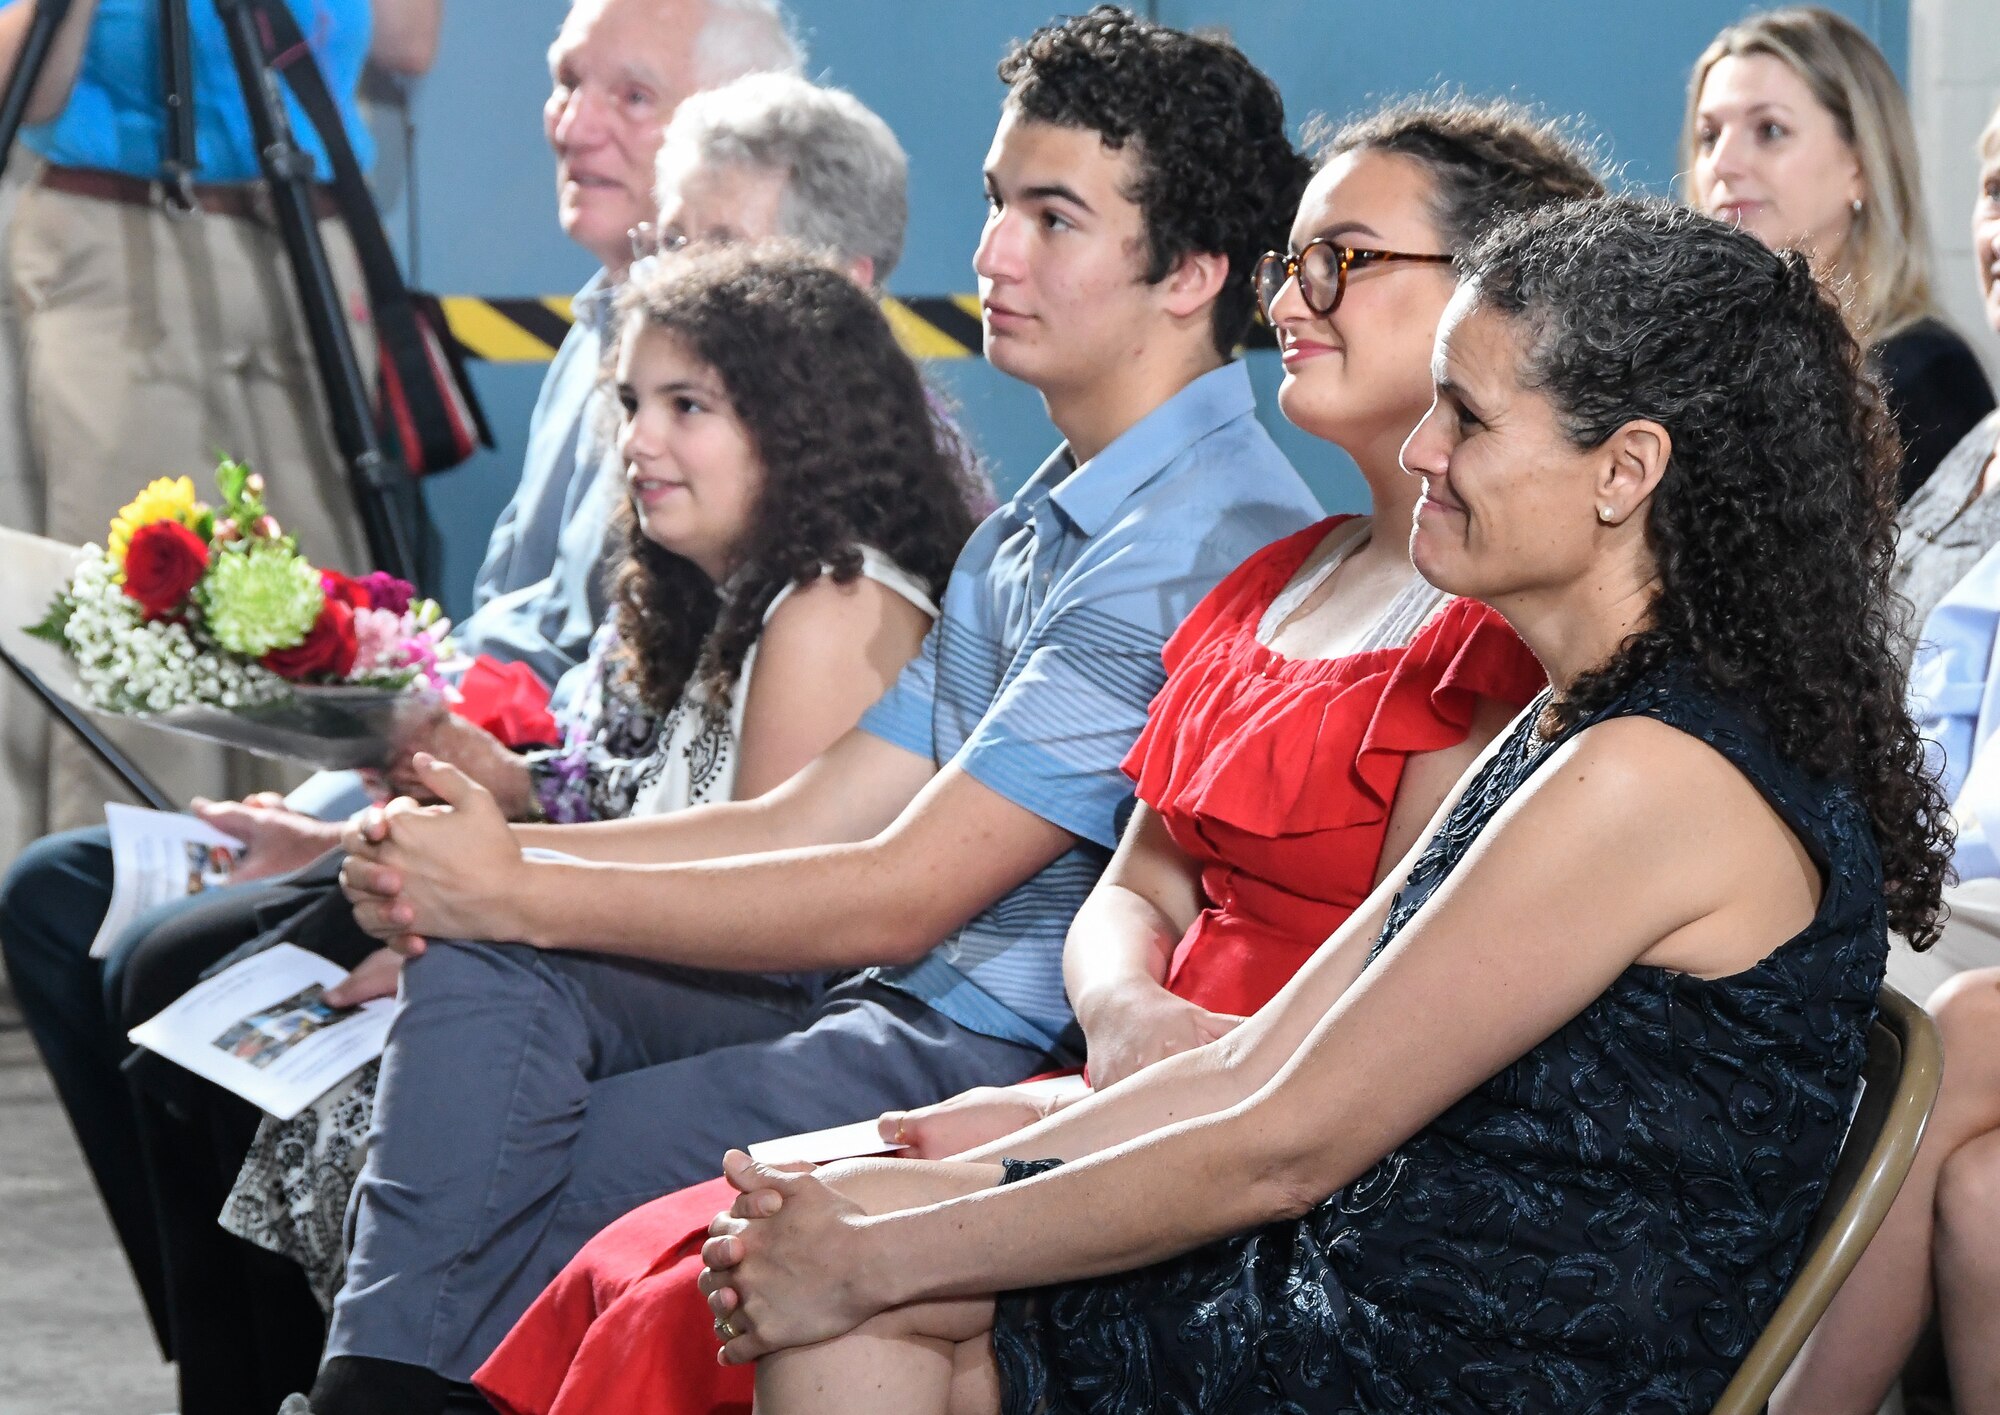 Members of Col. Jeffrey Geraghty's family listen as he speaks in praise of them after taking command of AEDC during a Change of Command Ceremony June 18 at the Large Rocket Motor Test Facility J-6 on Arnold Air Force Base. (U.S. Air Force photo by Jill Pickett)